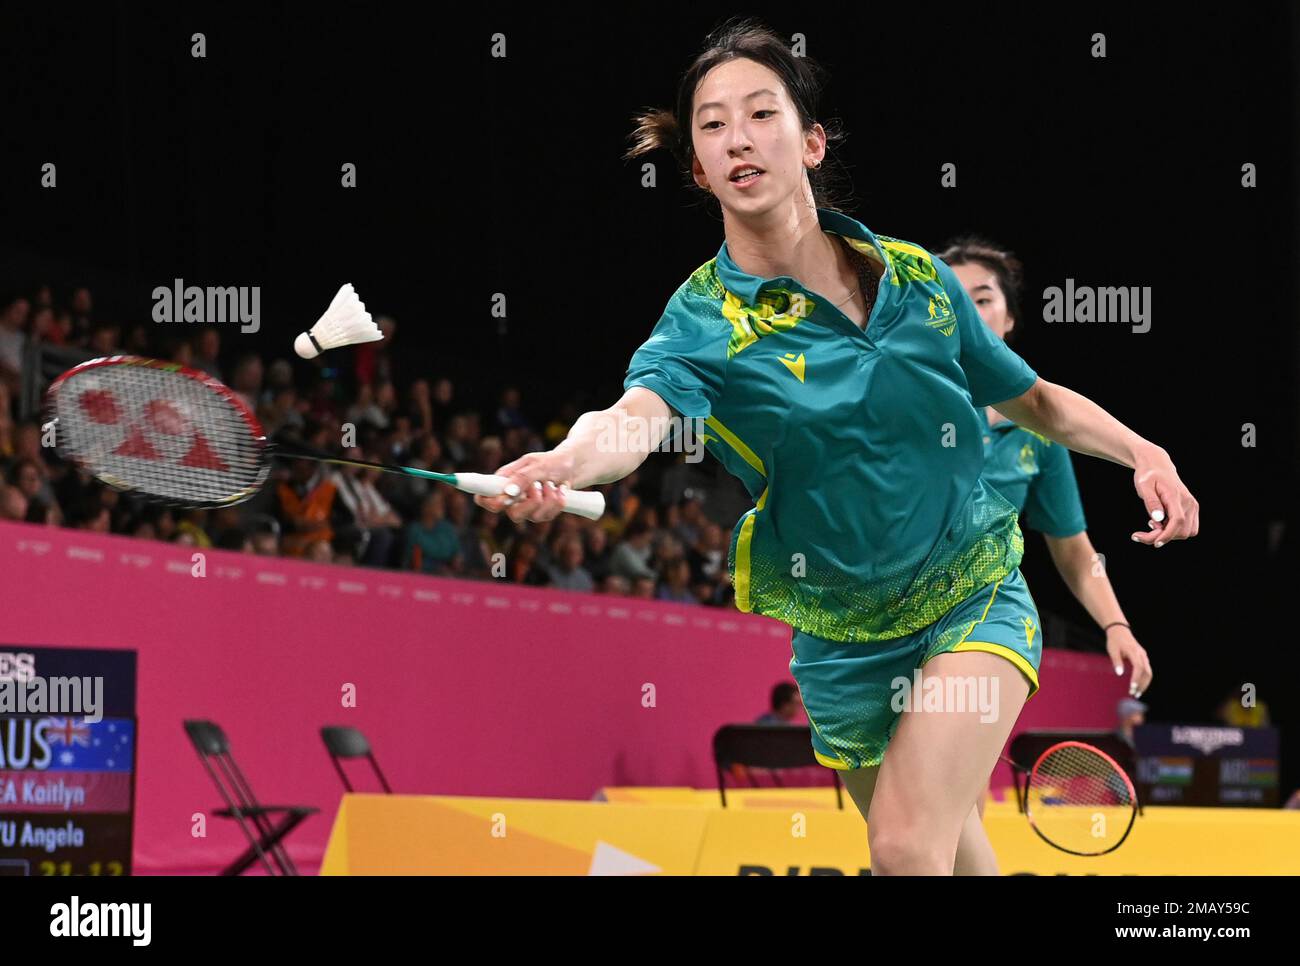 Australias Kaitlyn Ea, left, and Australias Angela Yug during the Badminton Womens Doubles Round game against Singapores Yujia Jin and and Singapores Jia Ying Crystal Wong at the Commonwealth Games in Birmingham,